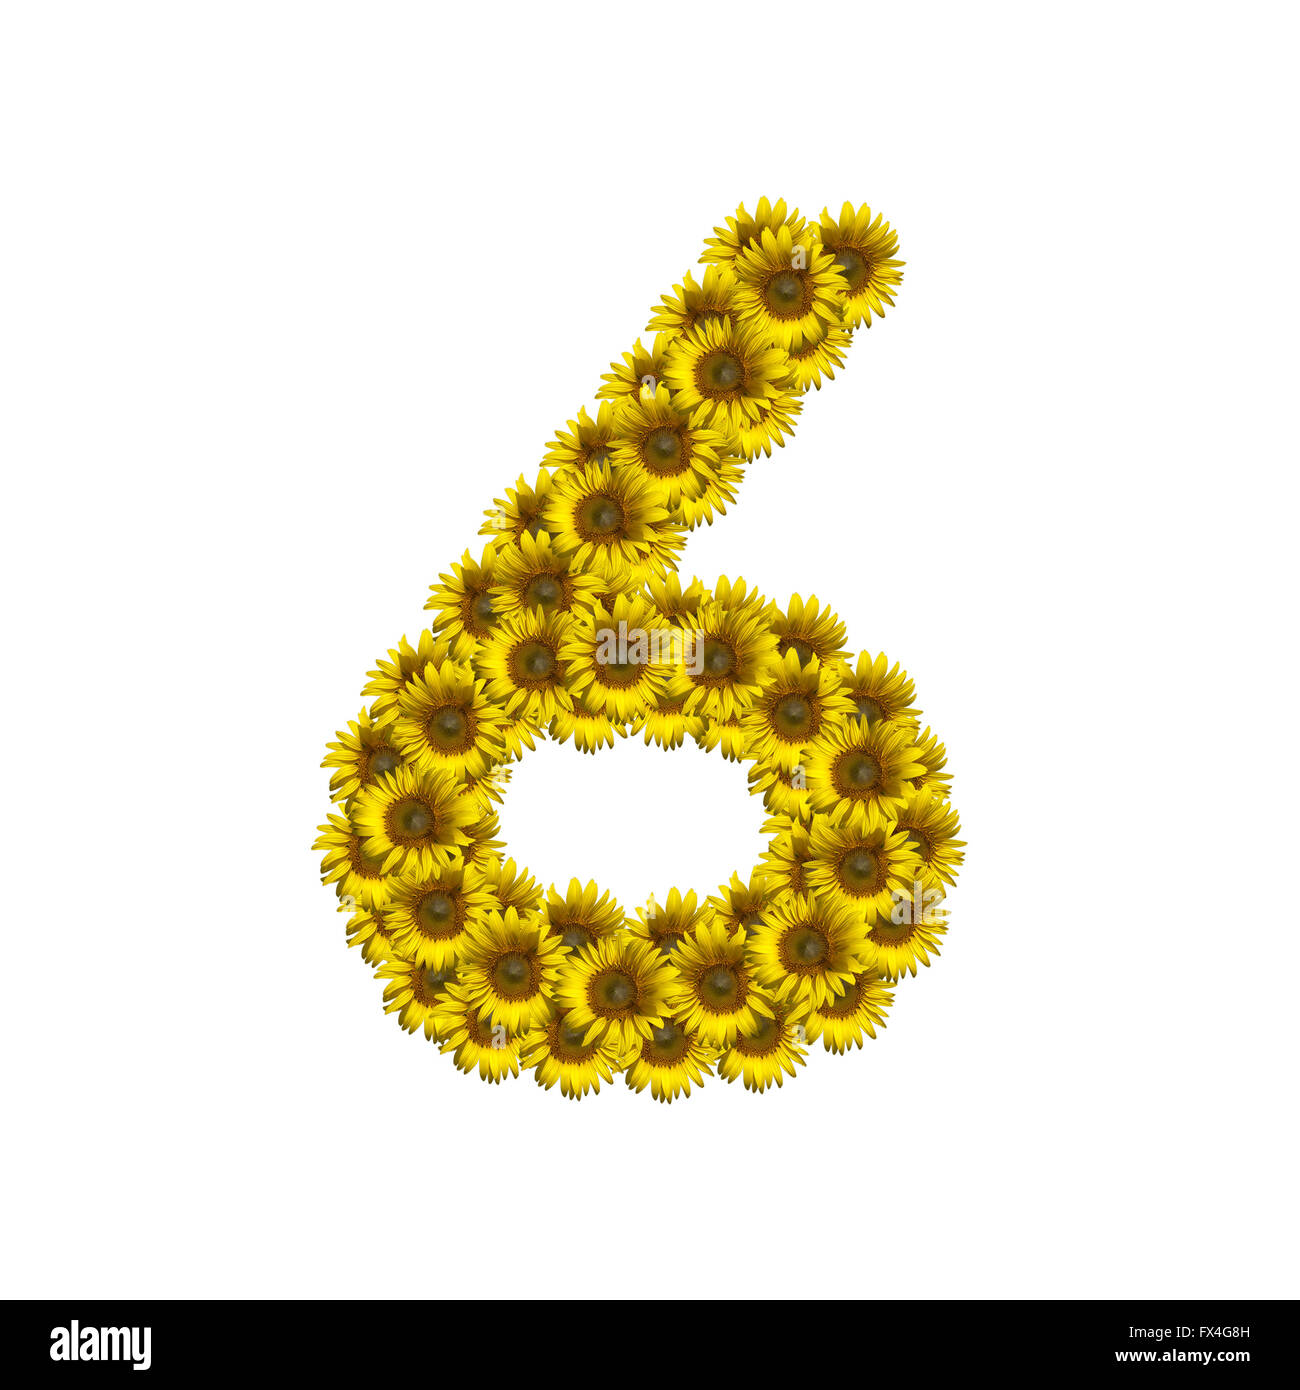 Sunflower number isolated on white background, number 6 Stock Photo